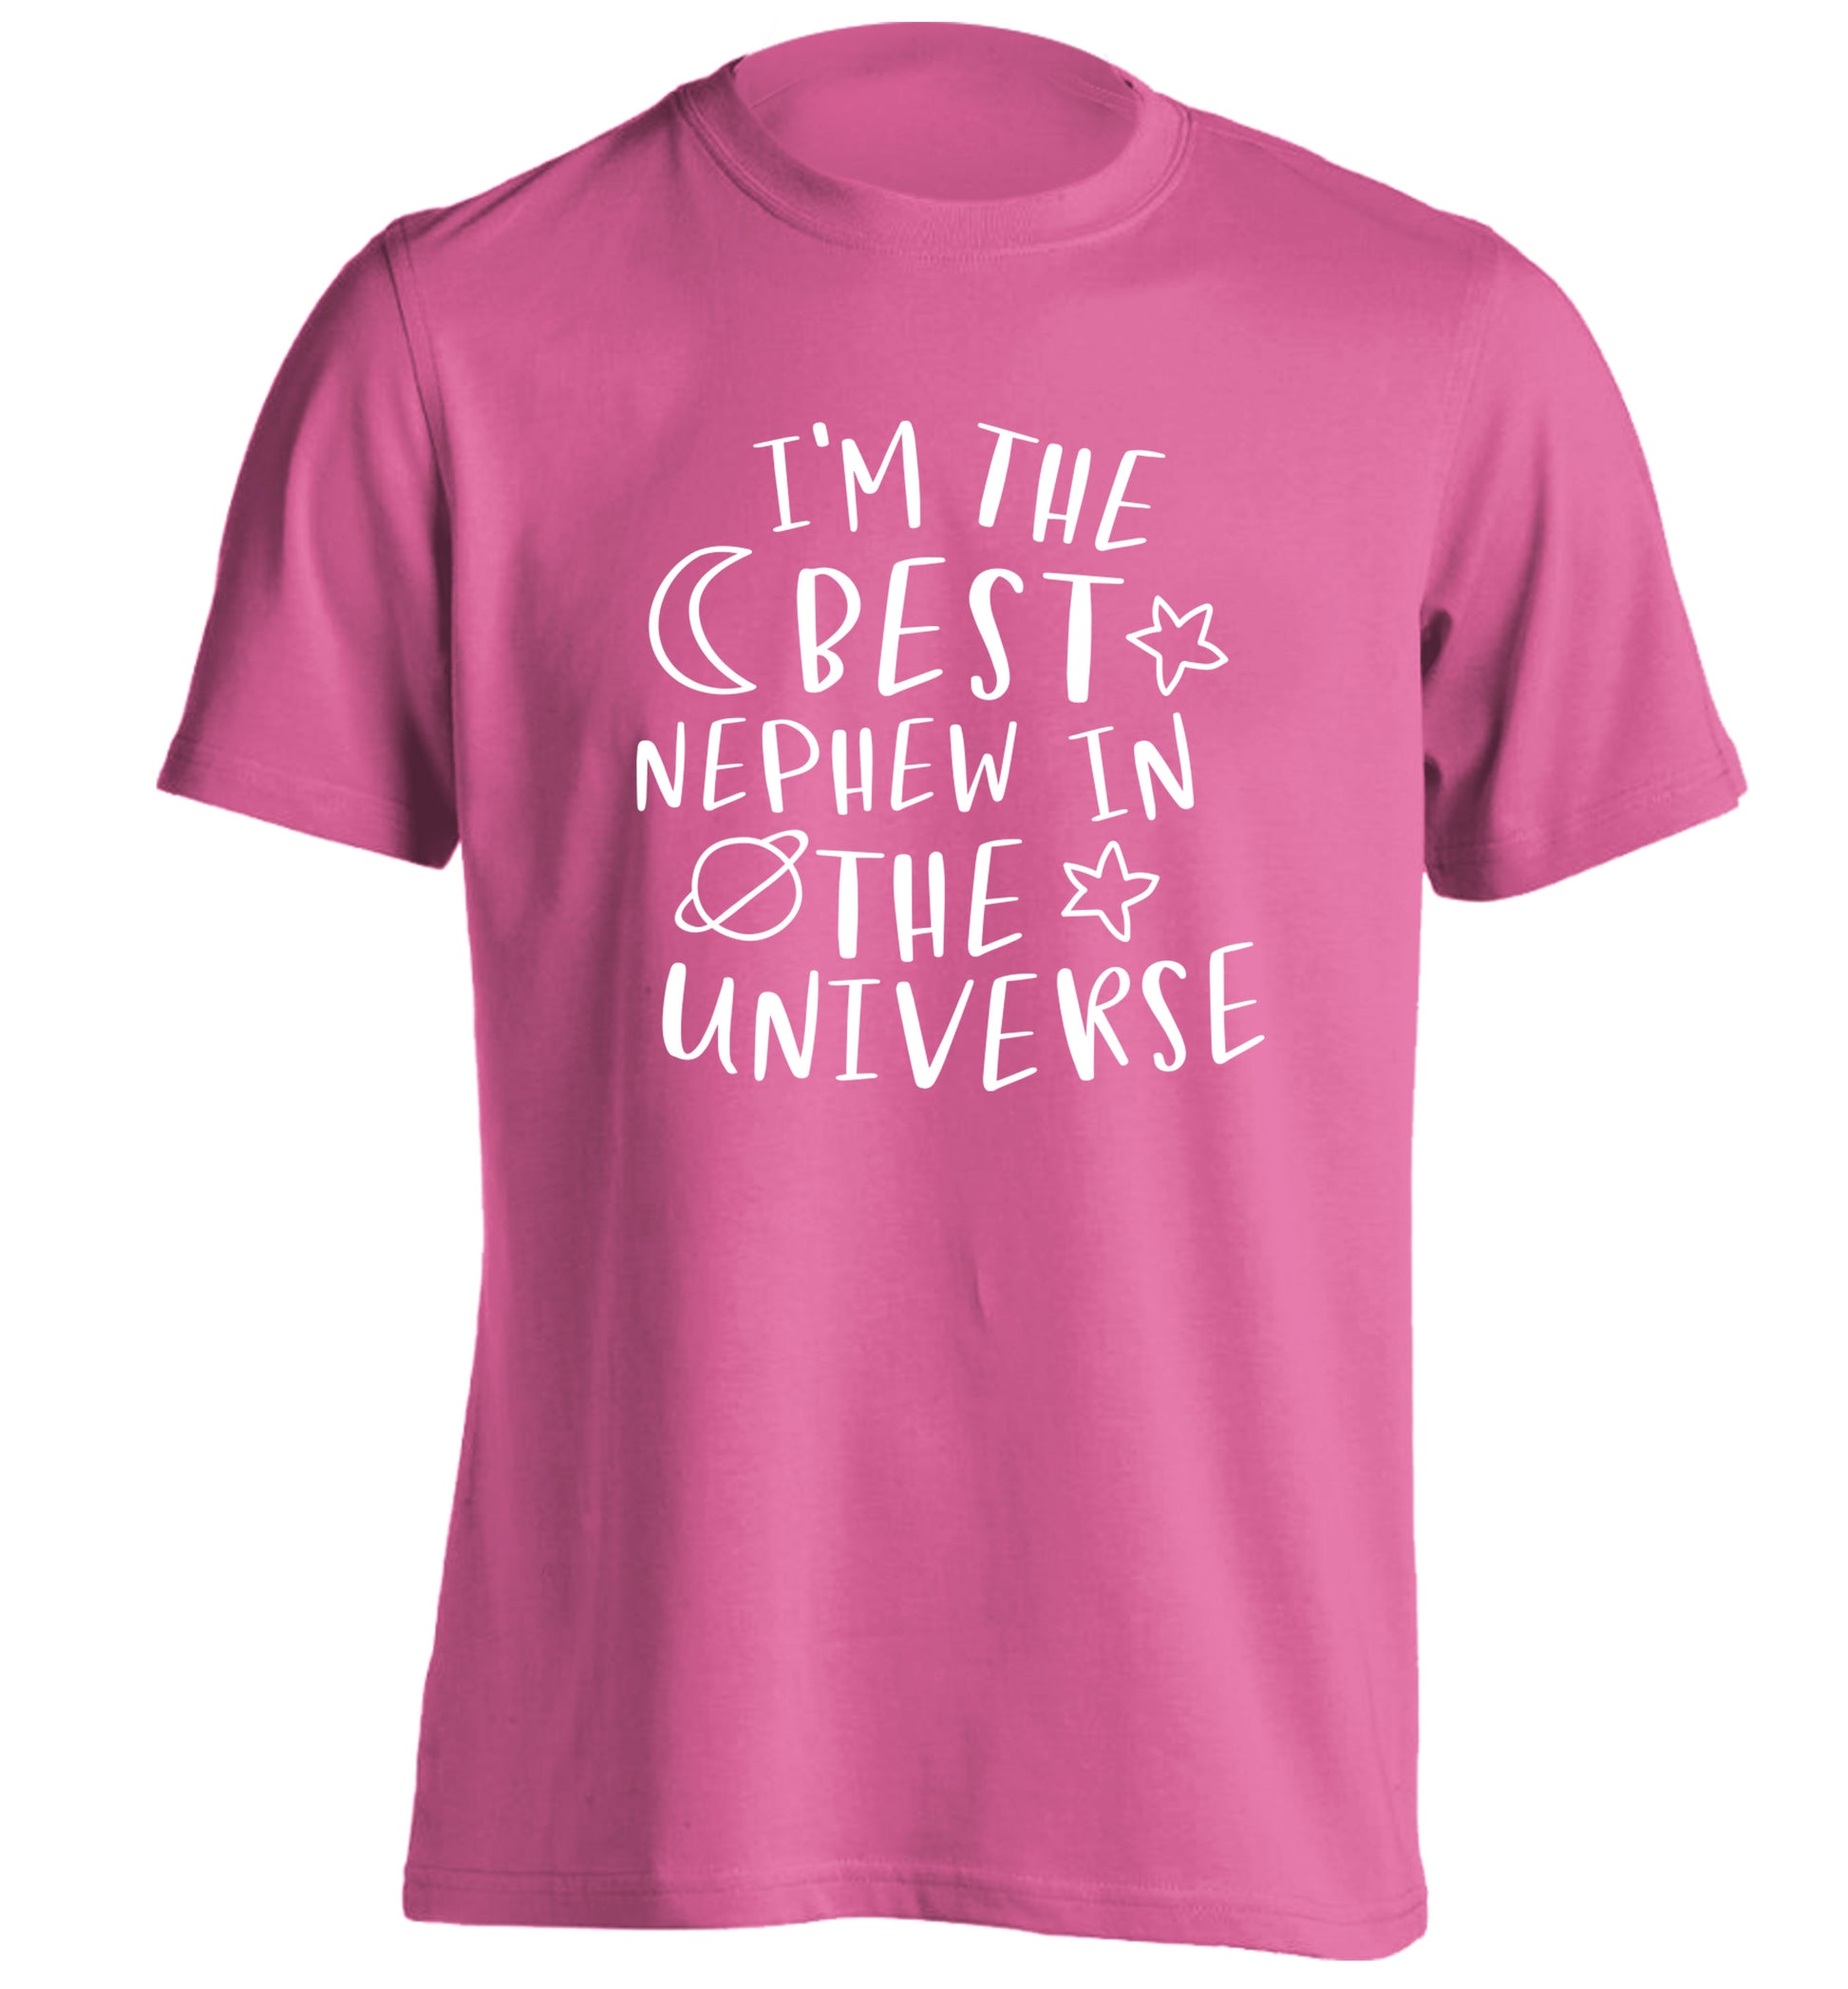 I'm the best nephew in the universe adults unisex pink Tshirt 2XL